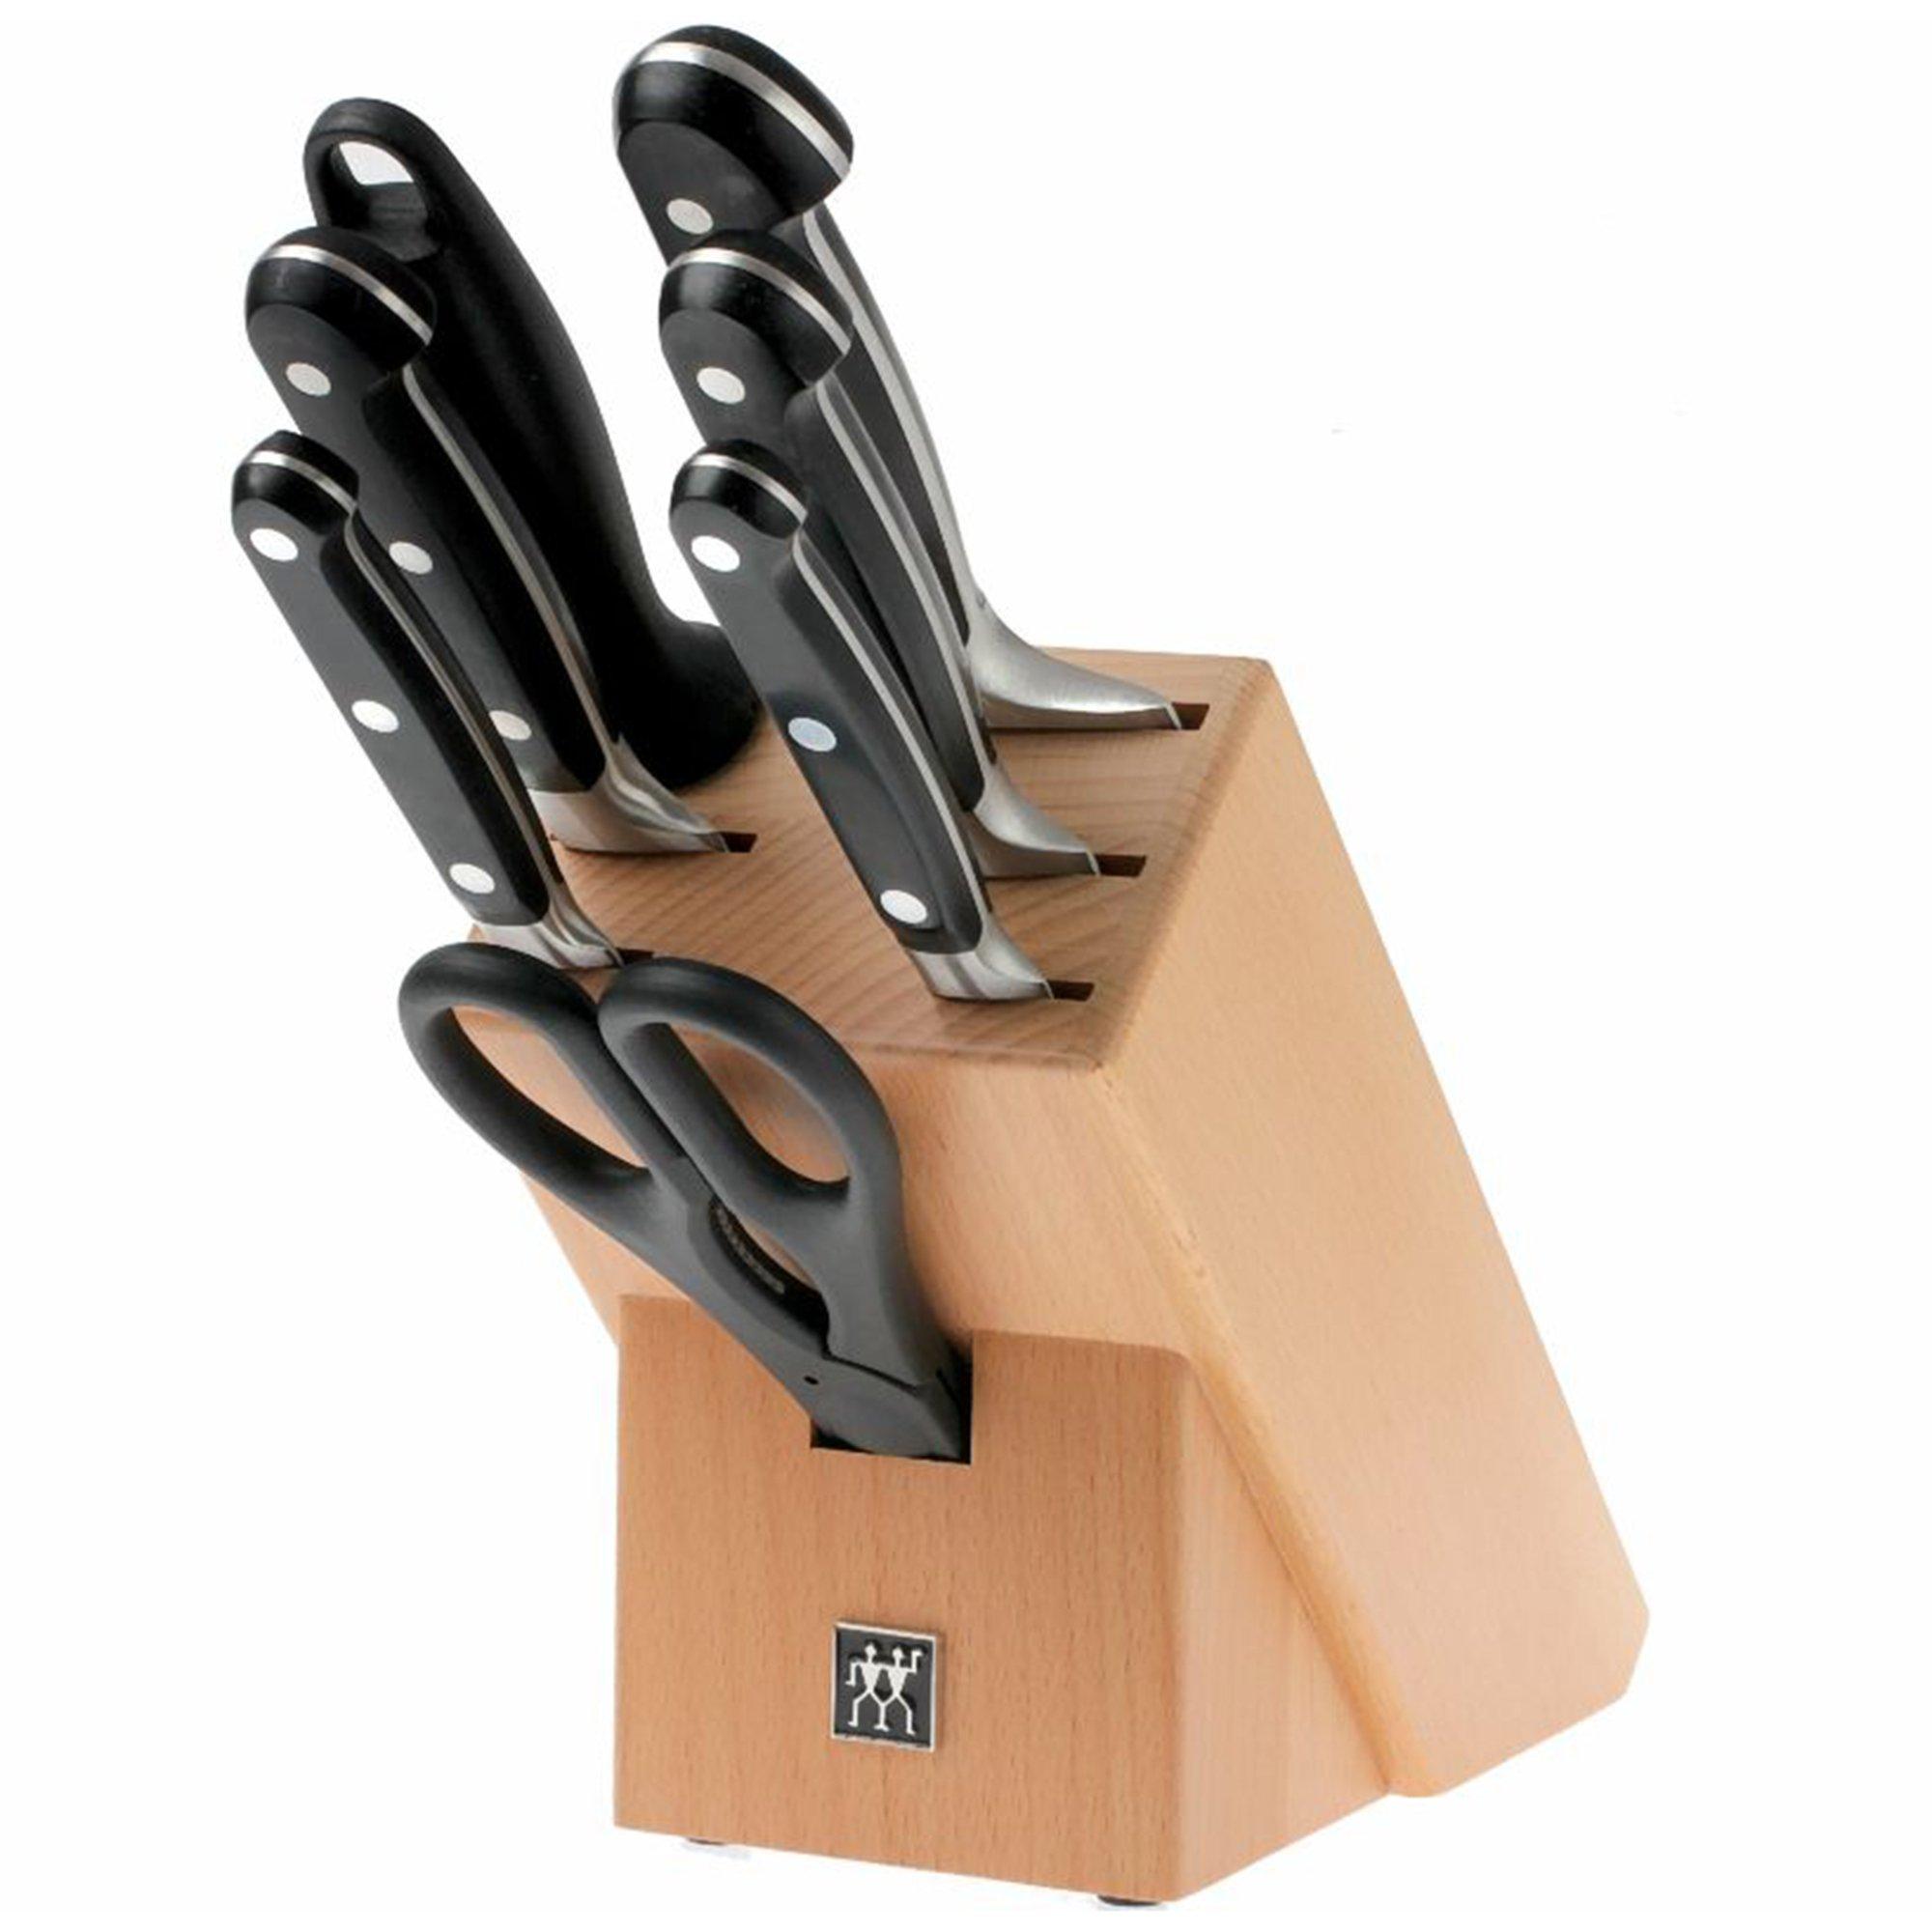 WMF Touch 1879085100, 2-piece red knife set